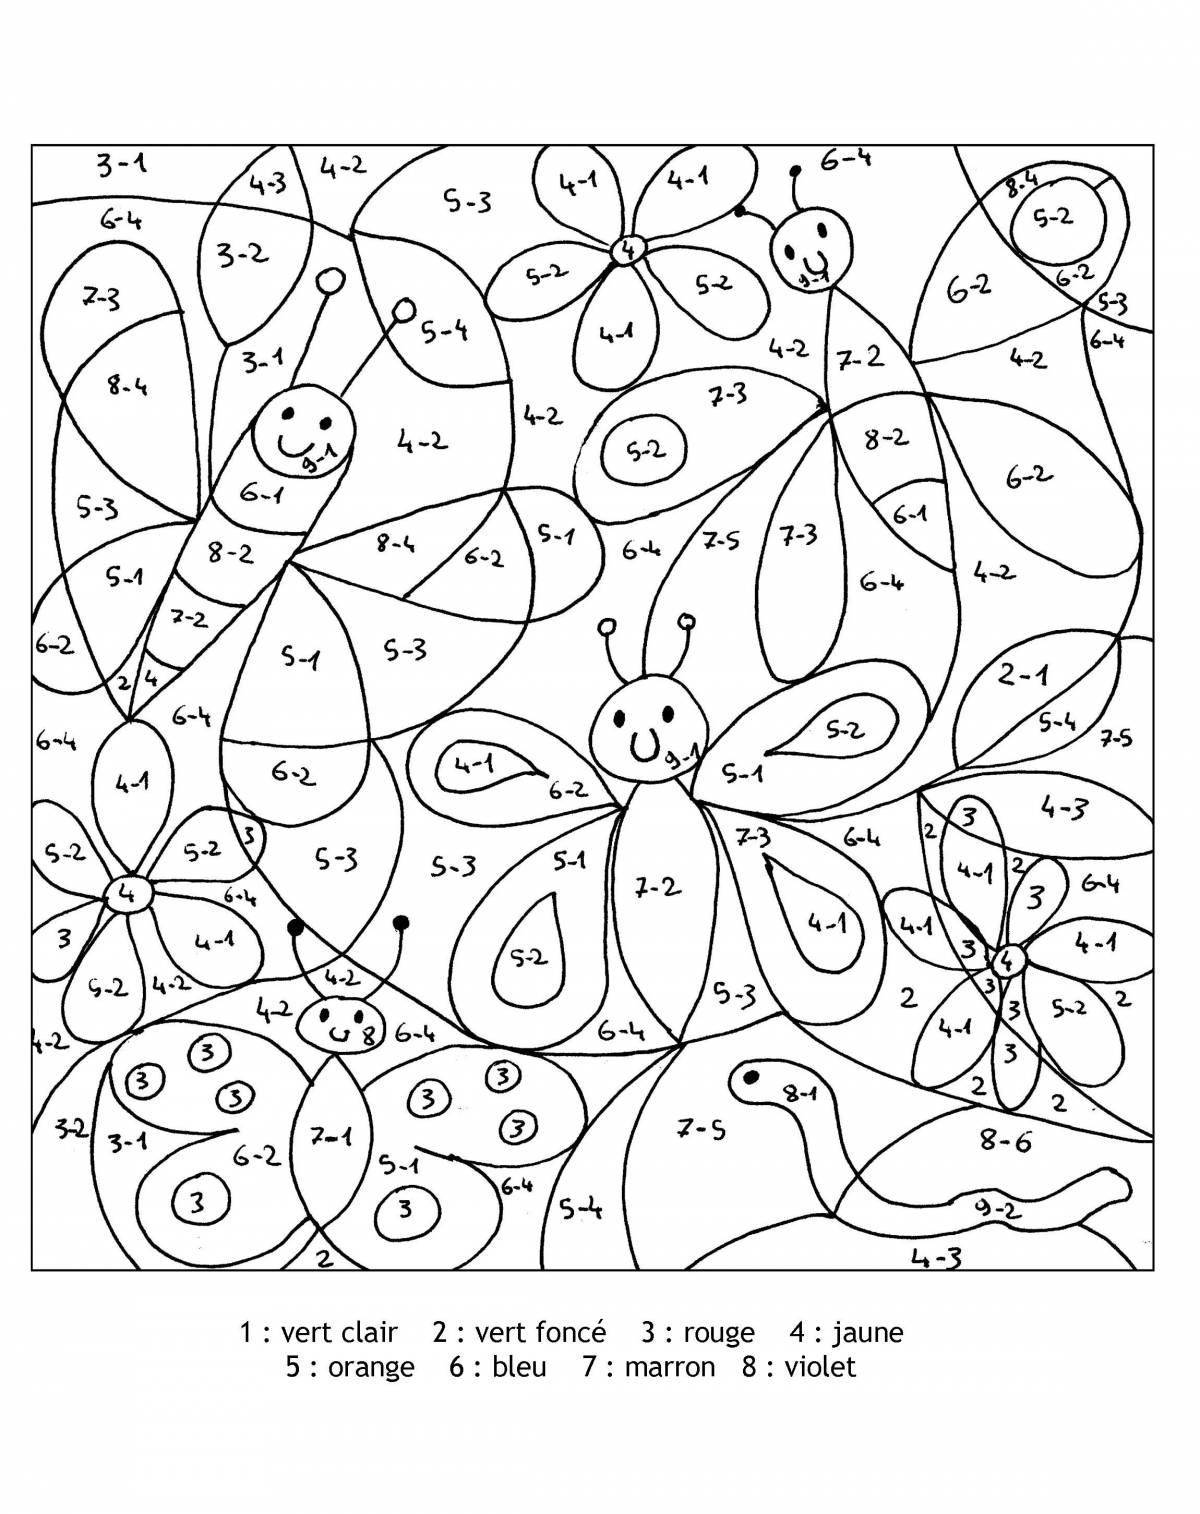 Delightful math by numbers coloring book